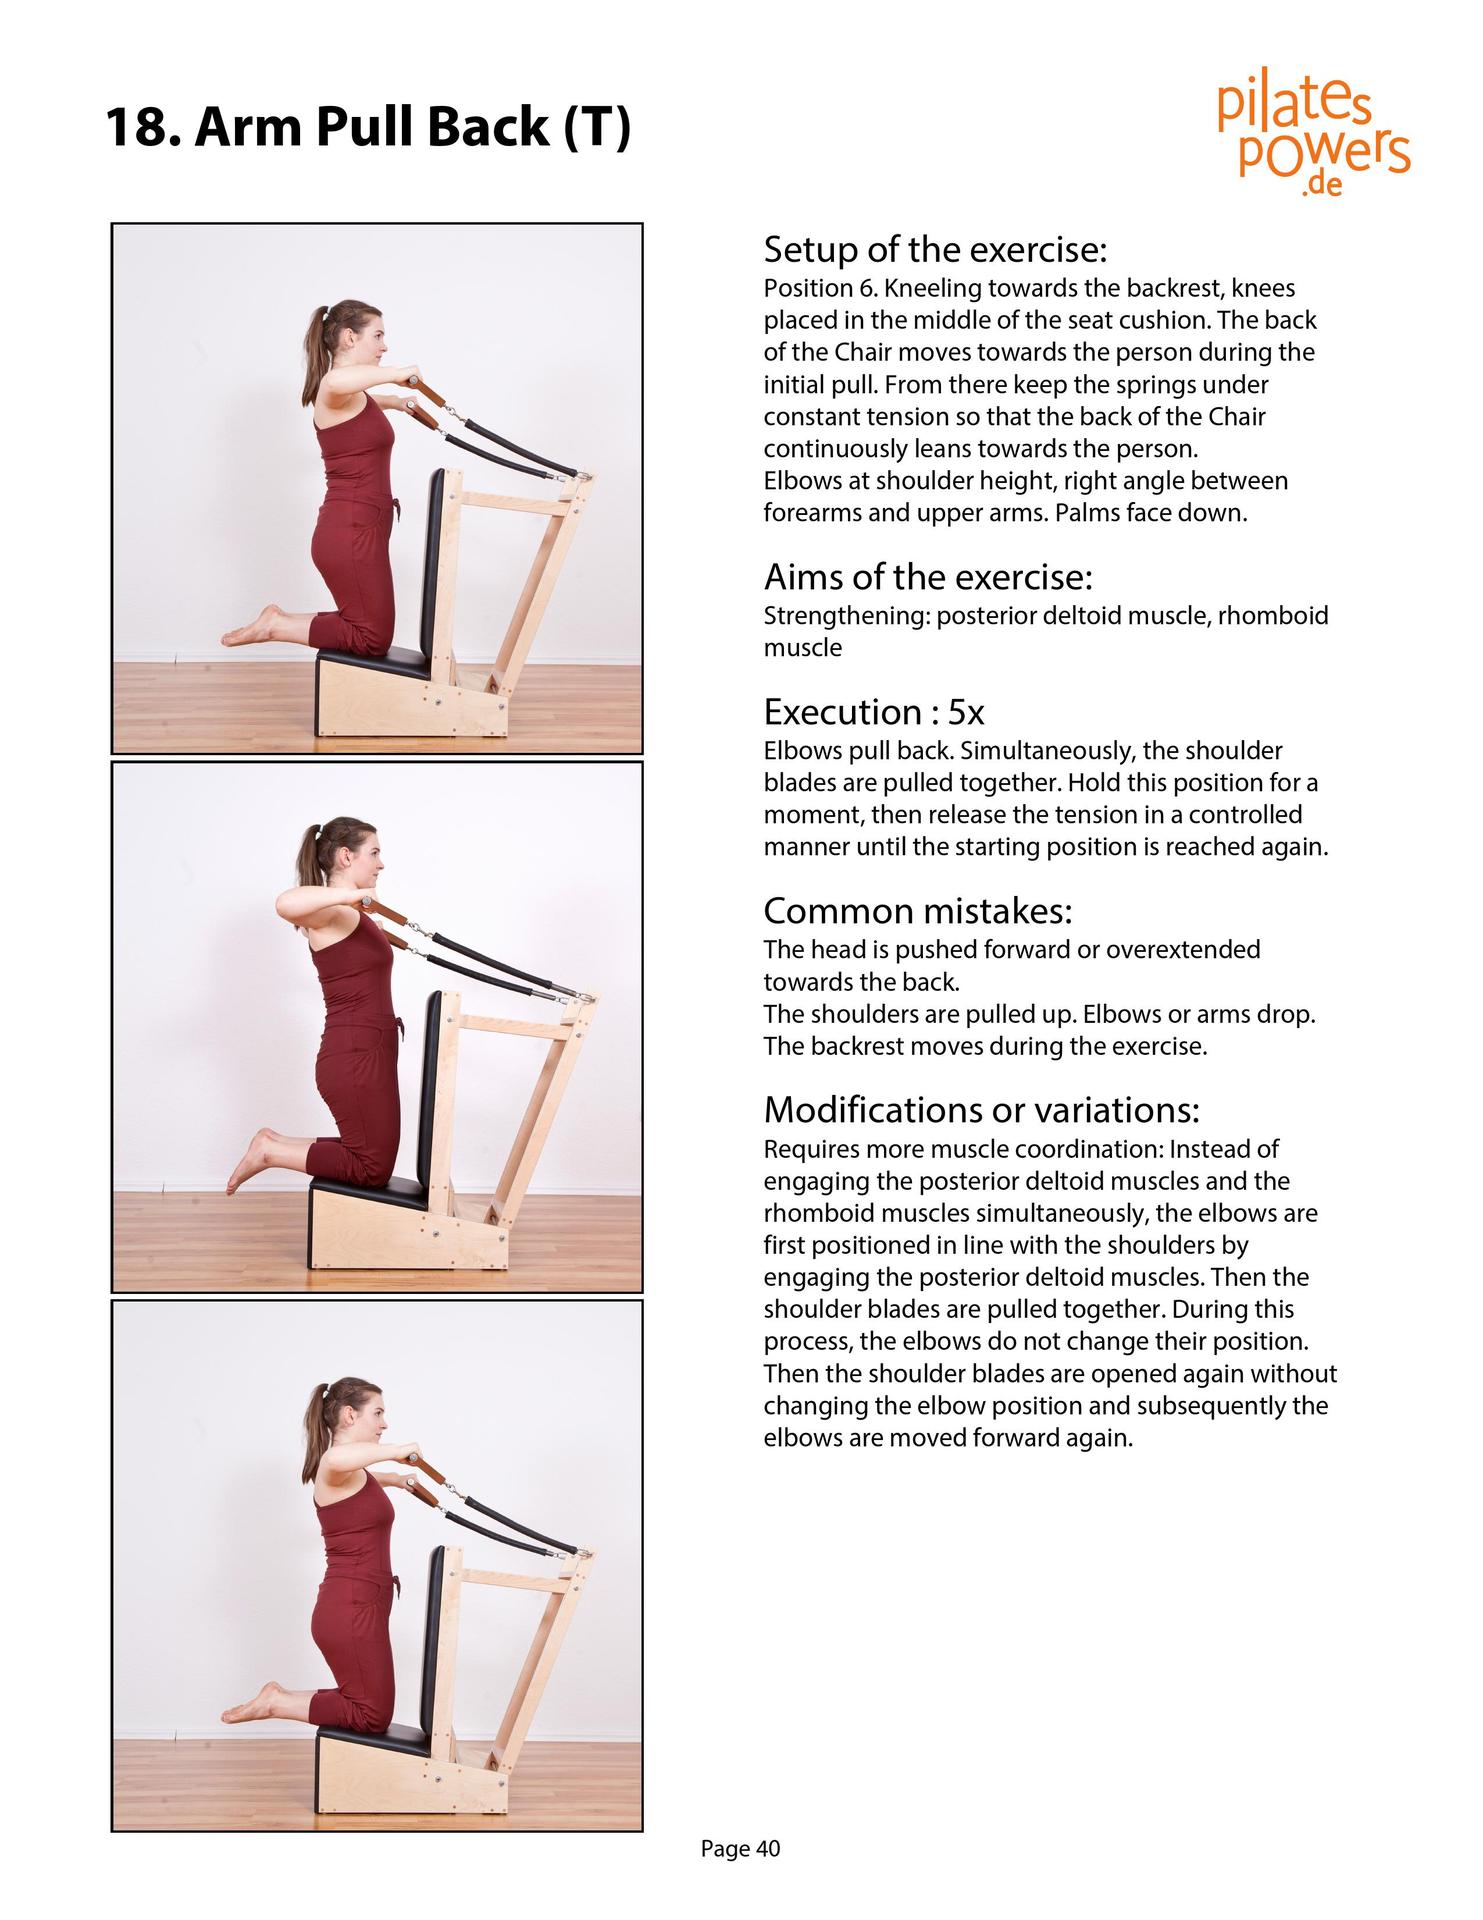 The Pilates Arm Chair The 42 most effective exercises - photo 40